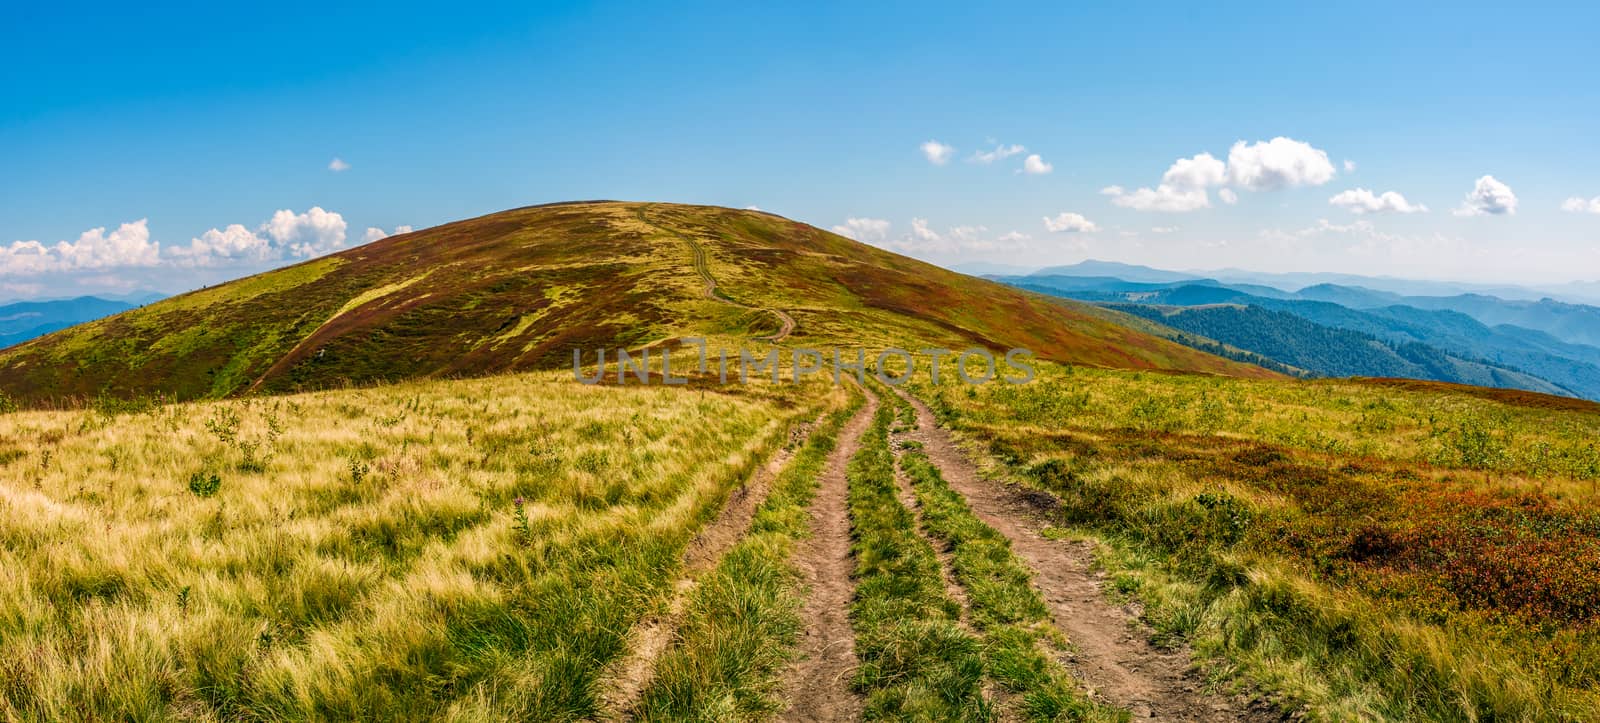 panorama with dirt road through grassy meadow on mountain ridge. beautiful summer landscape in carpathians